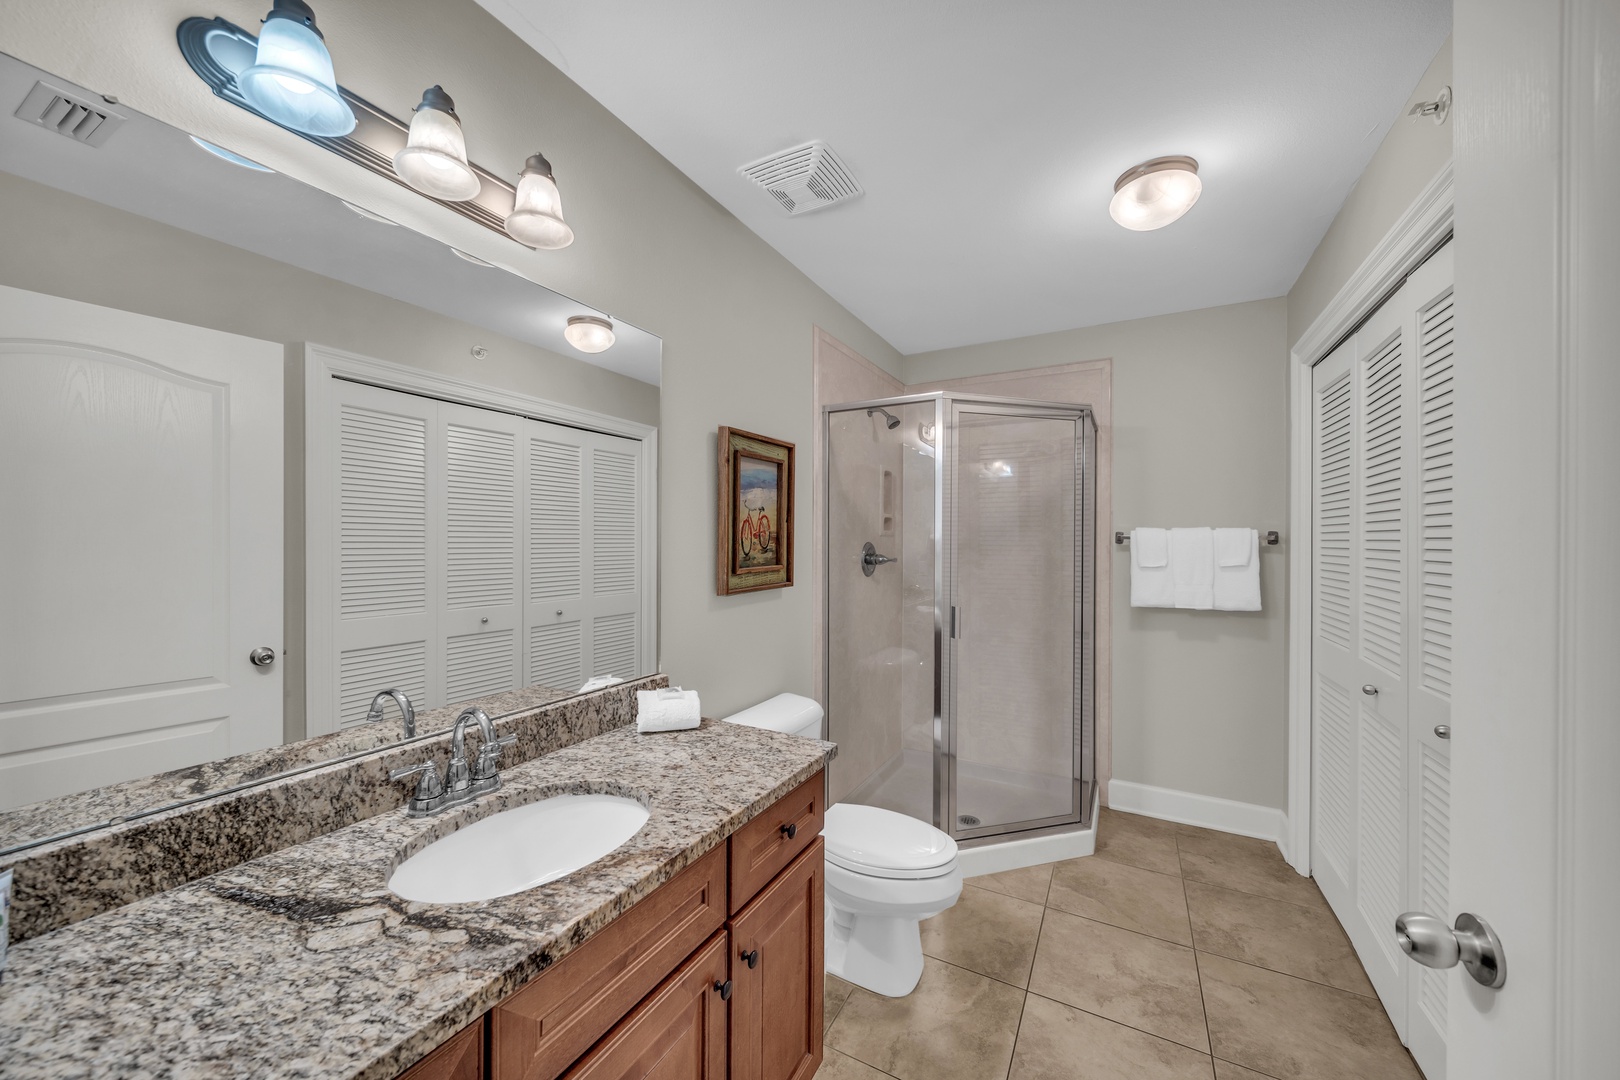 4th guest bathroom with walk in shower